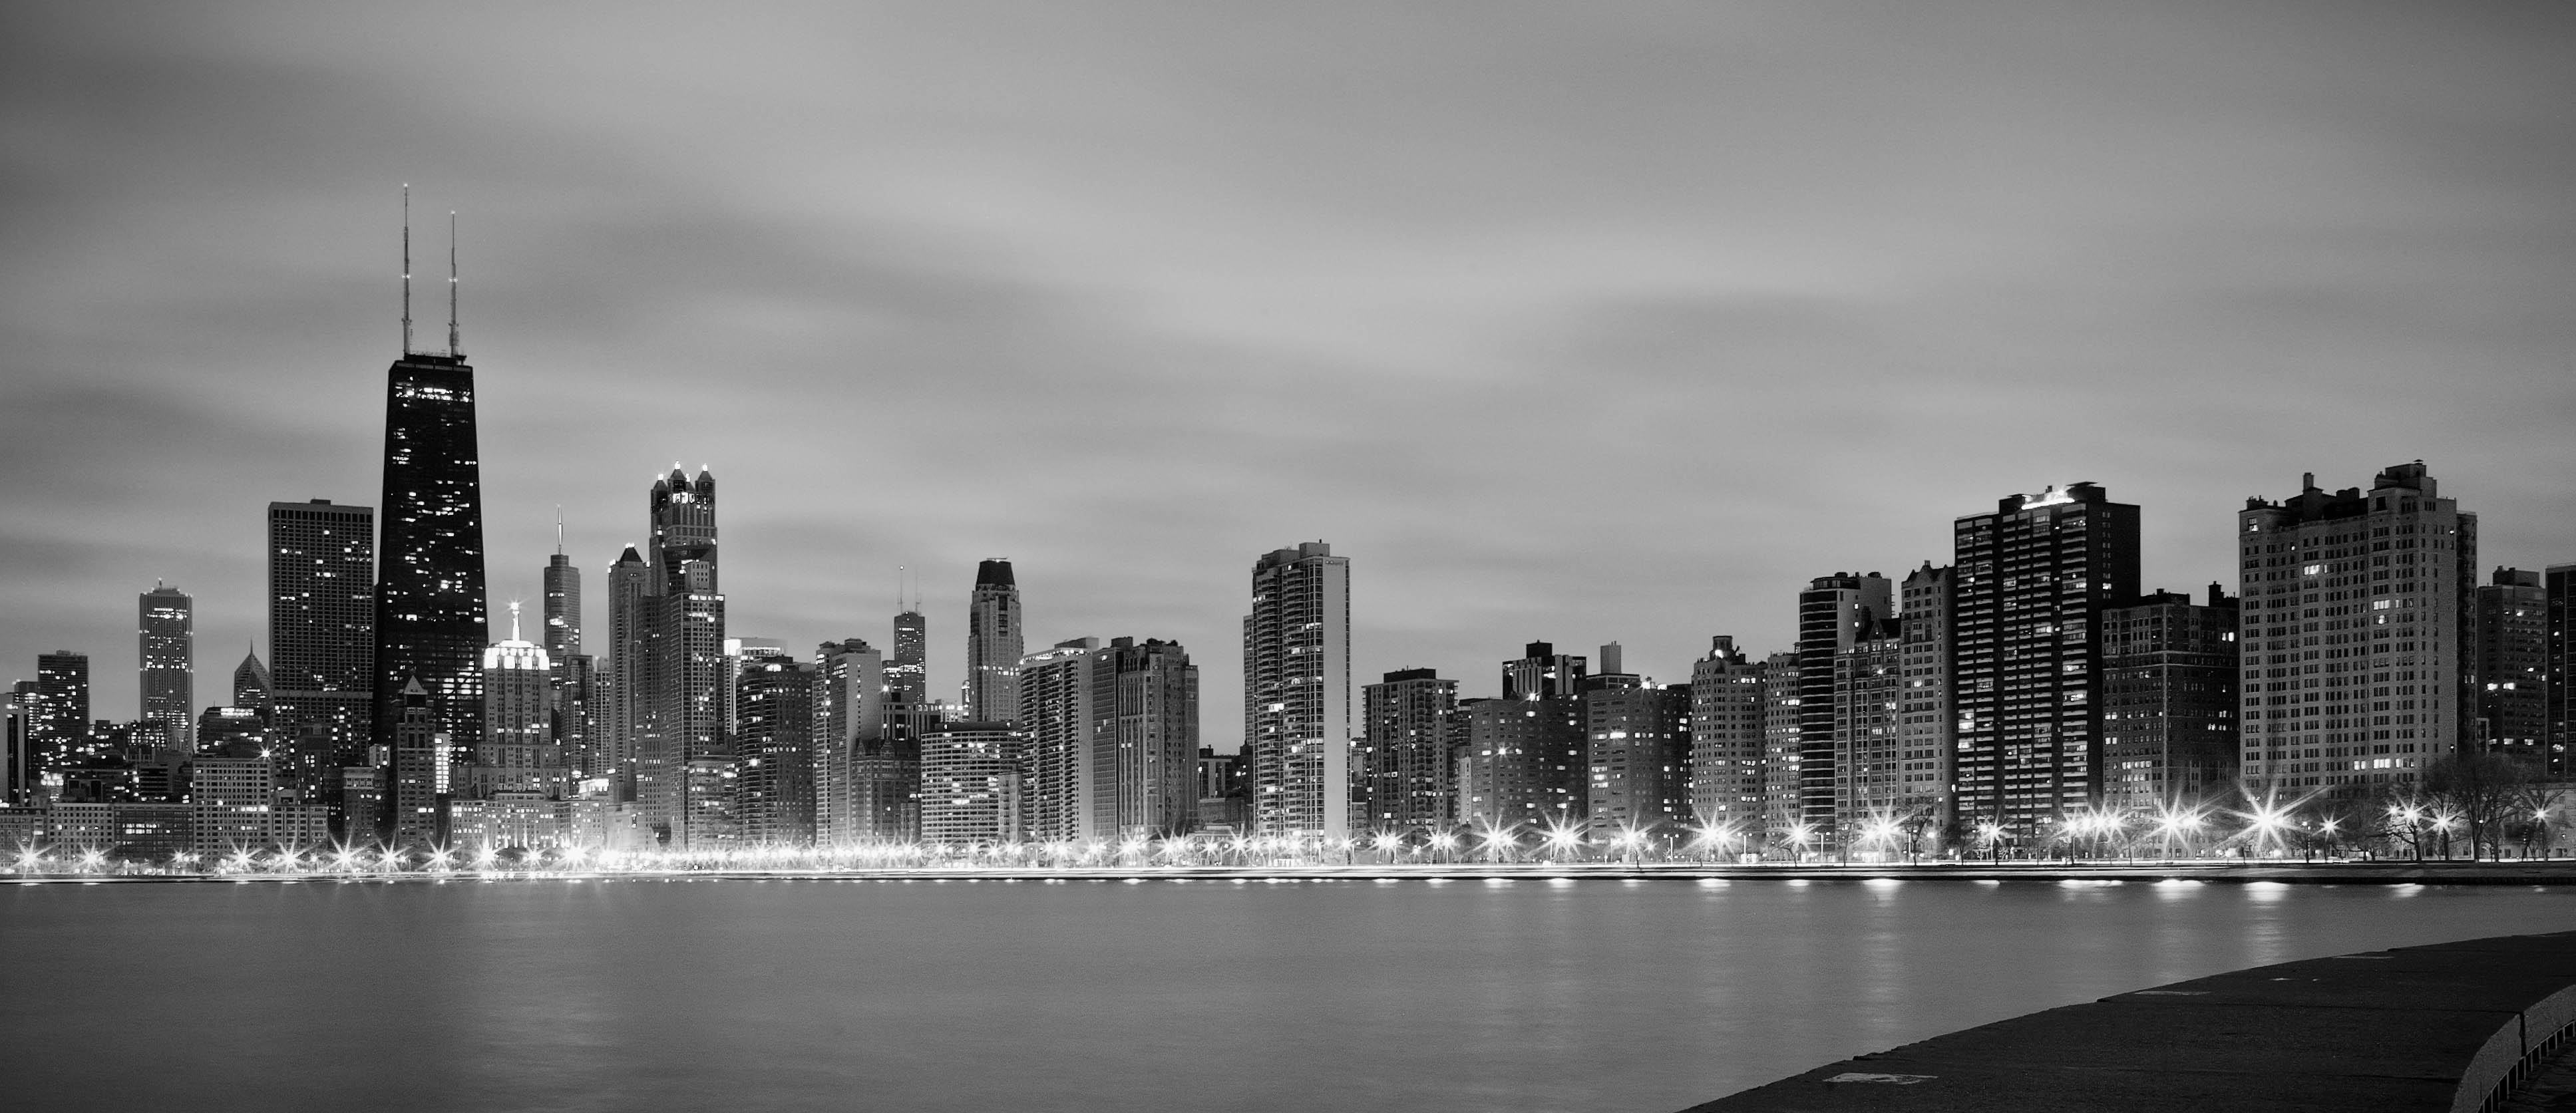 10 Most Popular Chicago Skyline Hd Wallpapers FULL HD 1080p For PC Desktop